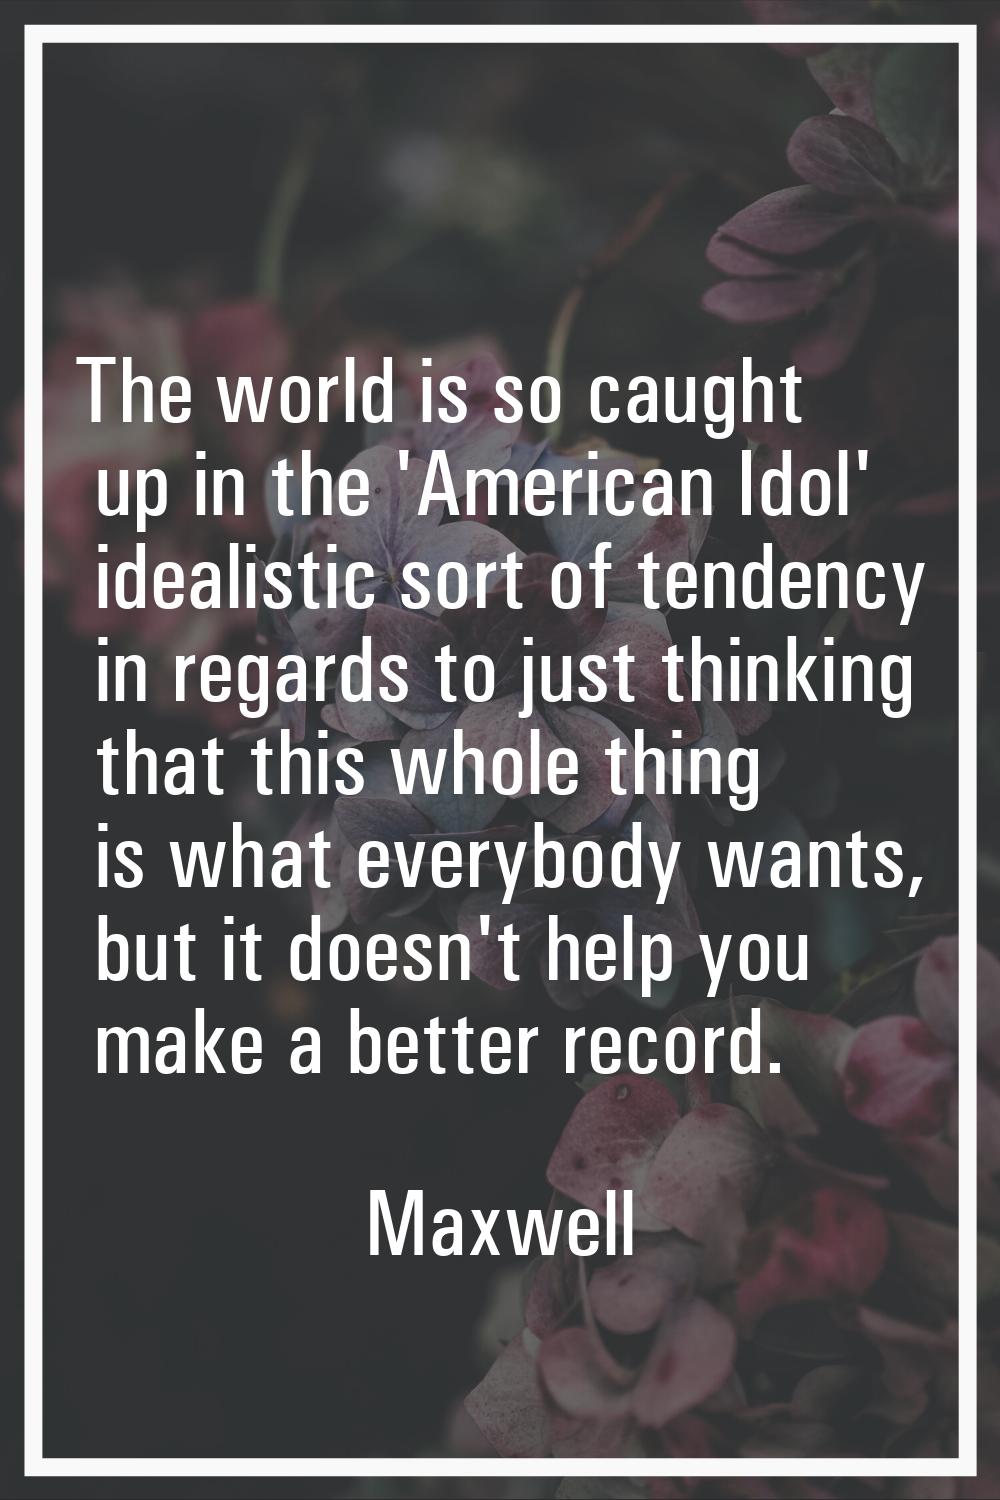 The world is so caught up in the 'American Idol' idealistic sort of tendency in regards to just thi